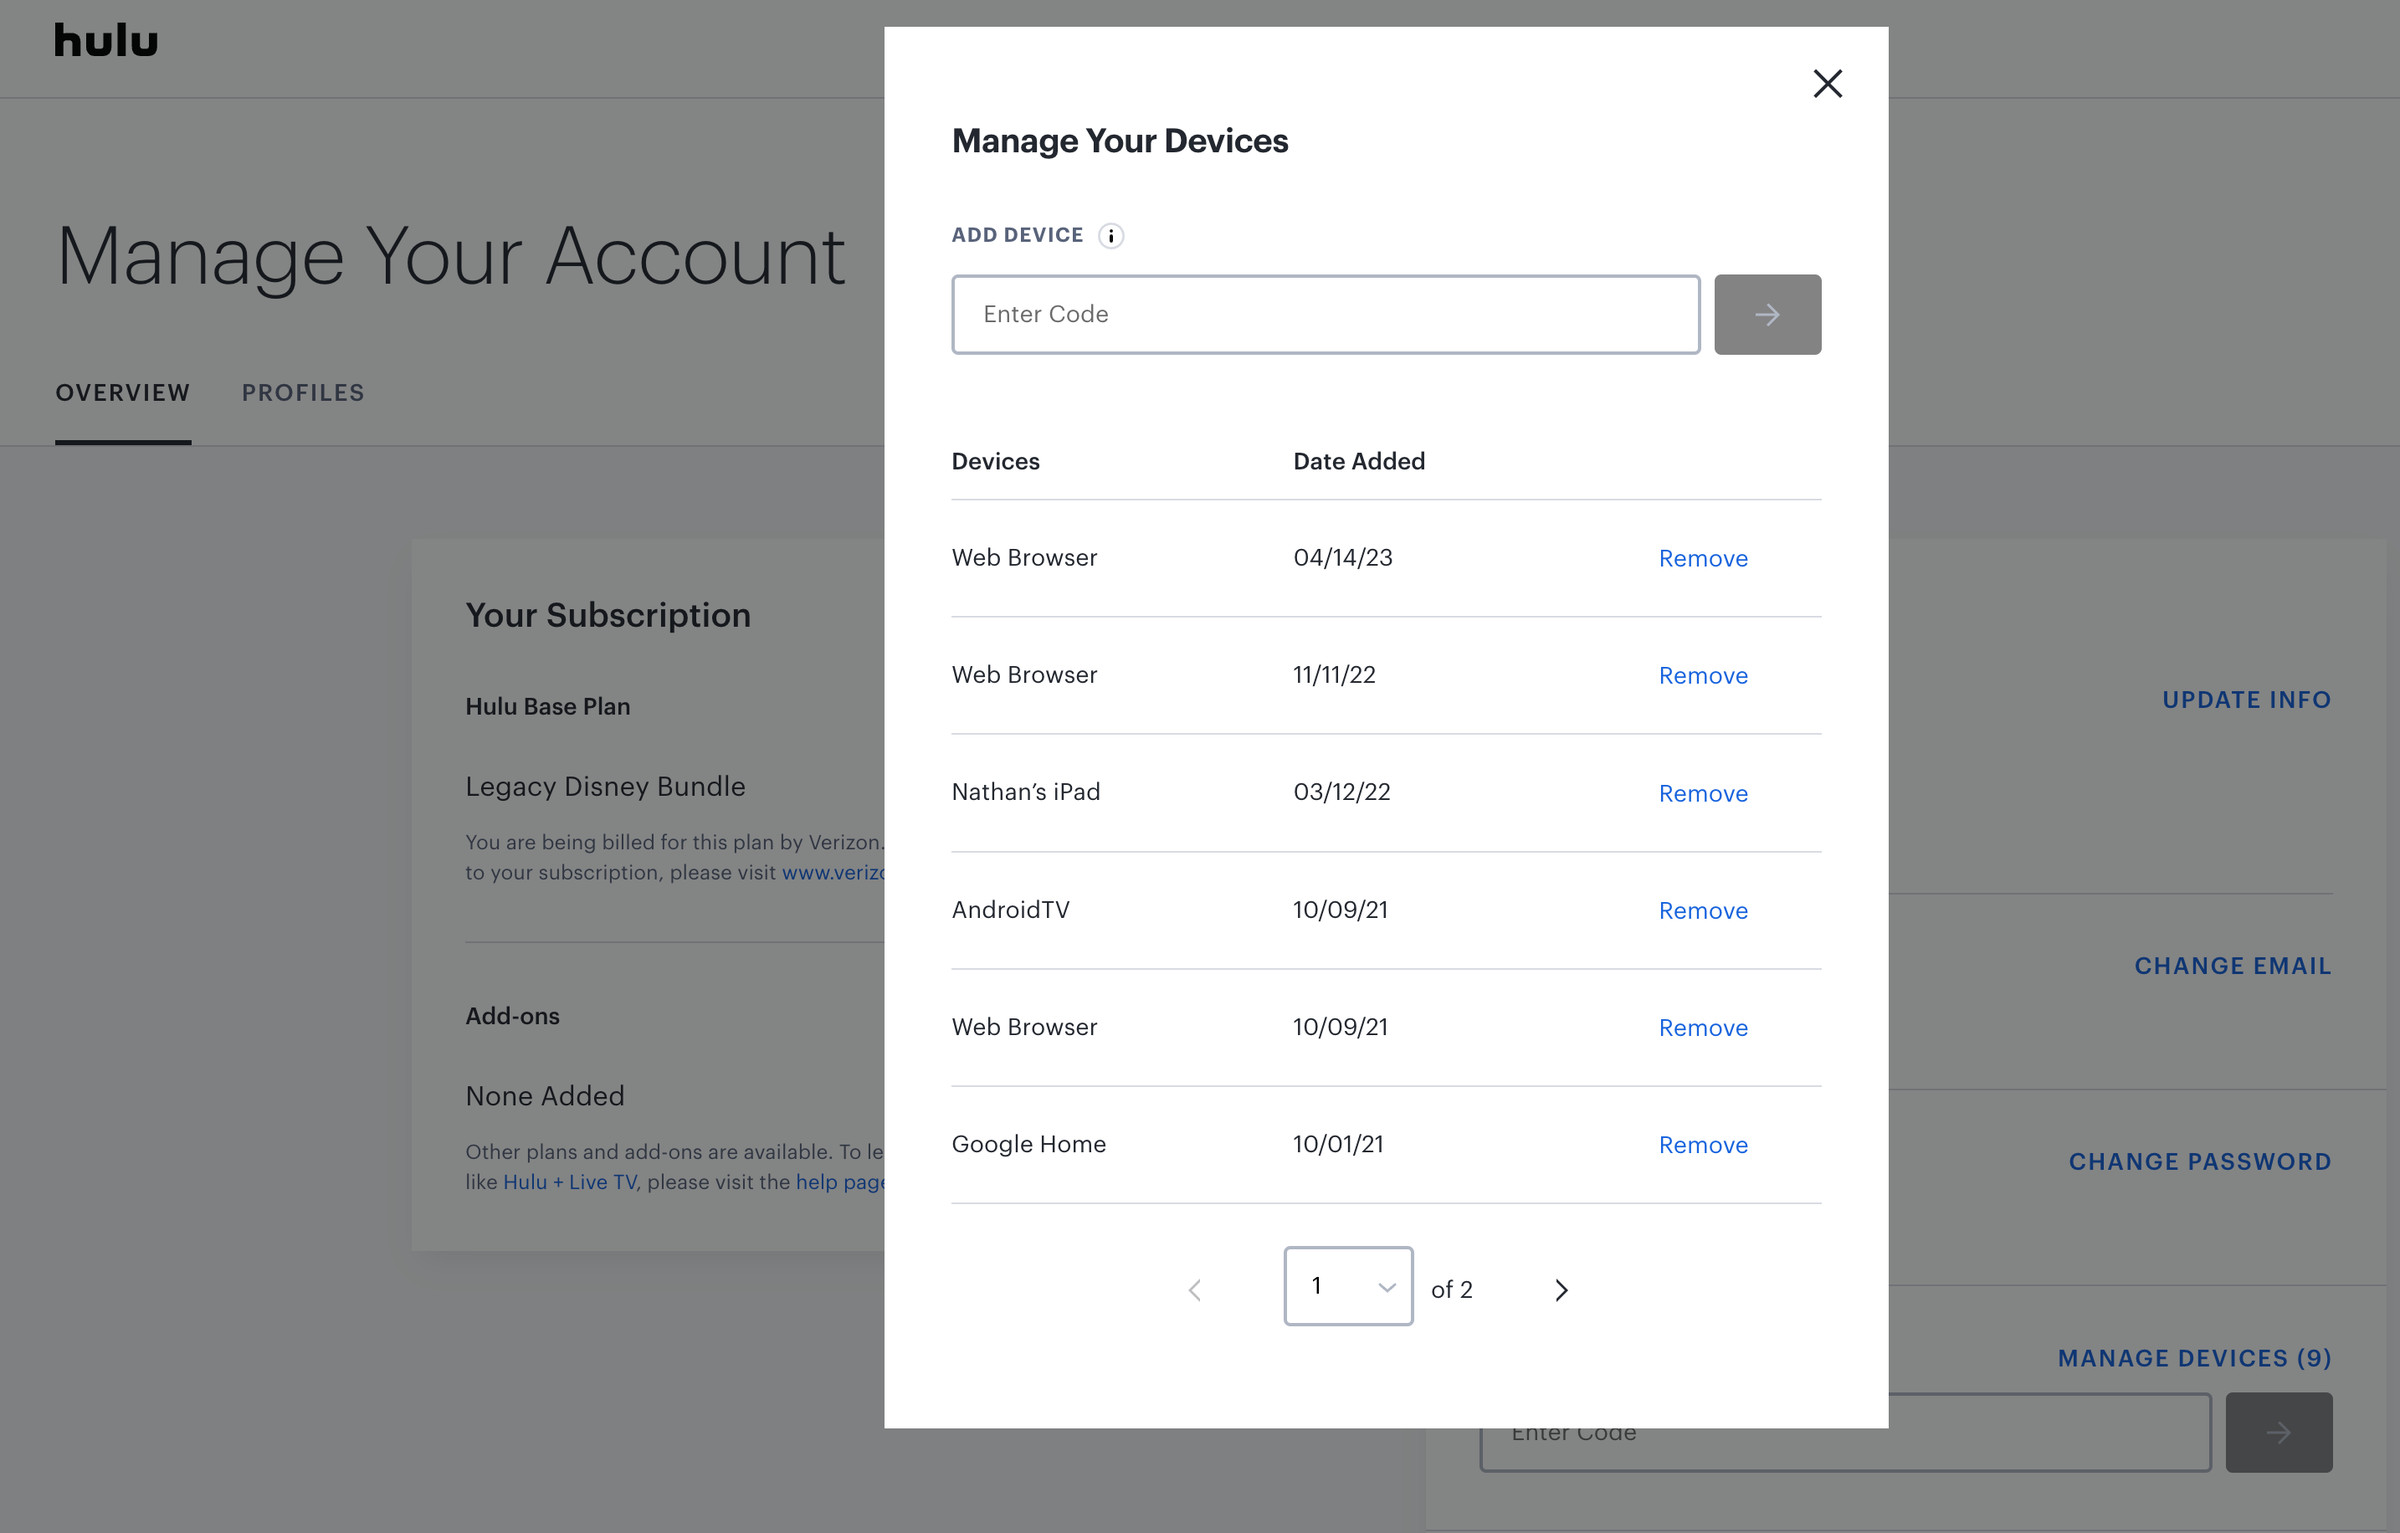 Manage Your Devices shows a list of all the devices your account is currently logged in to.